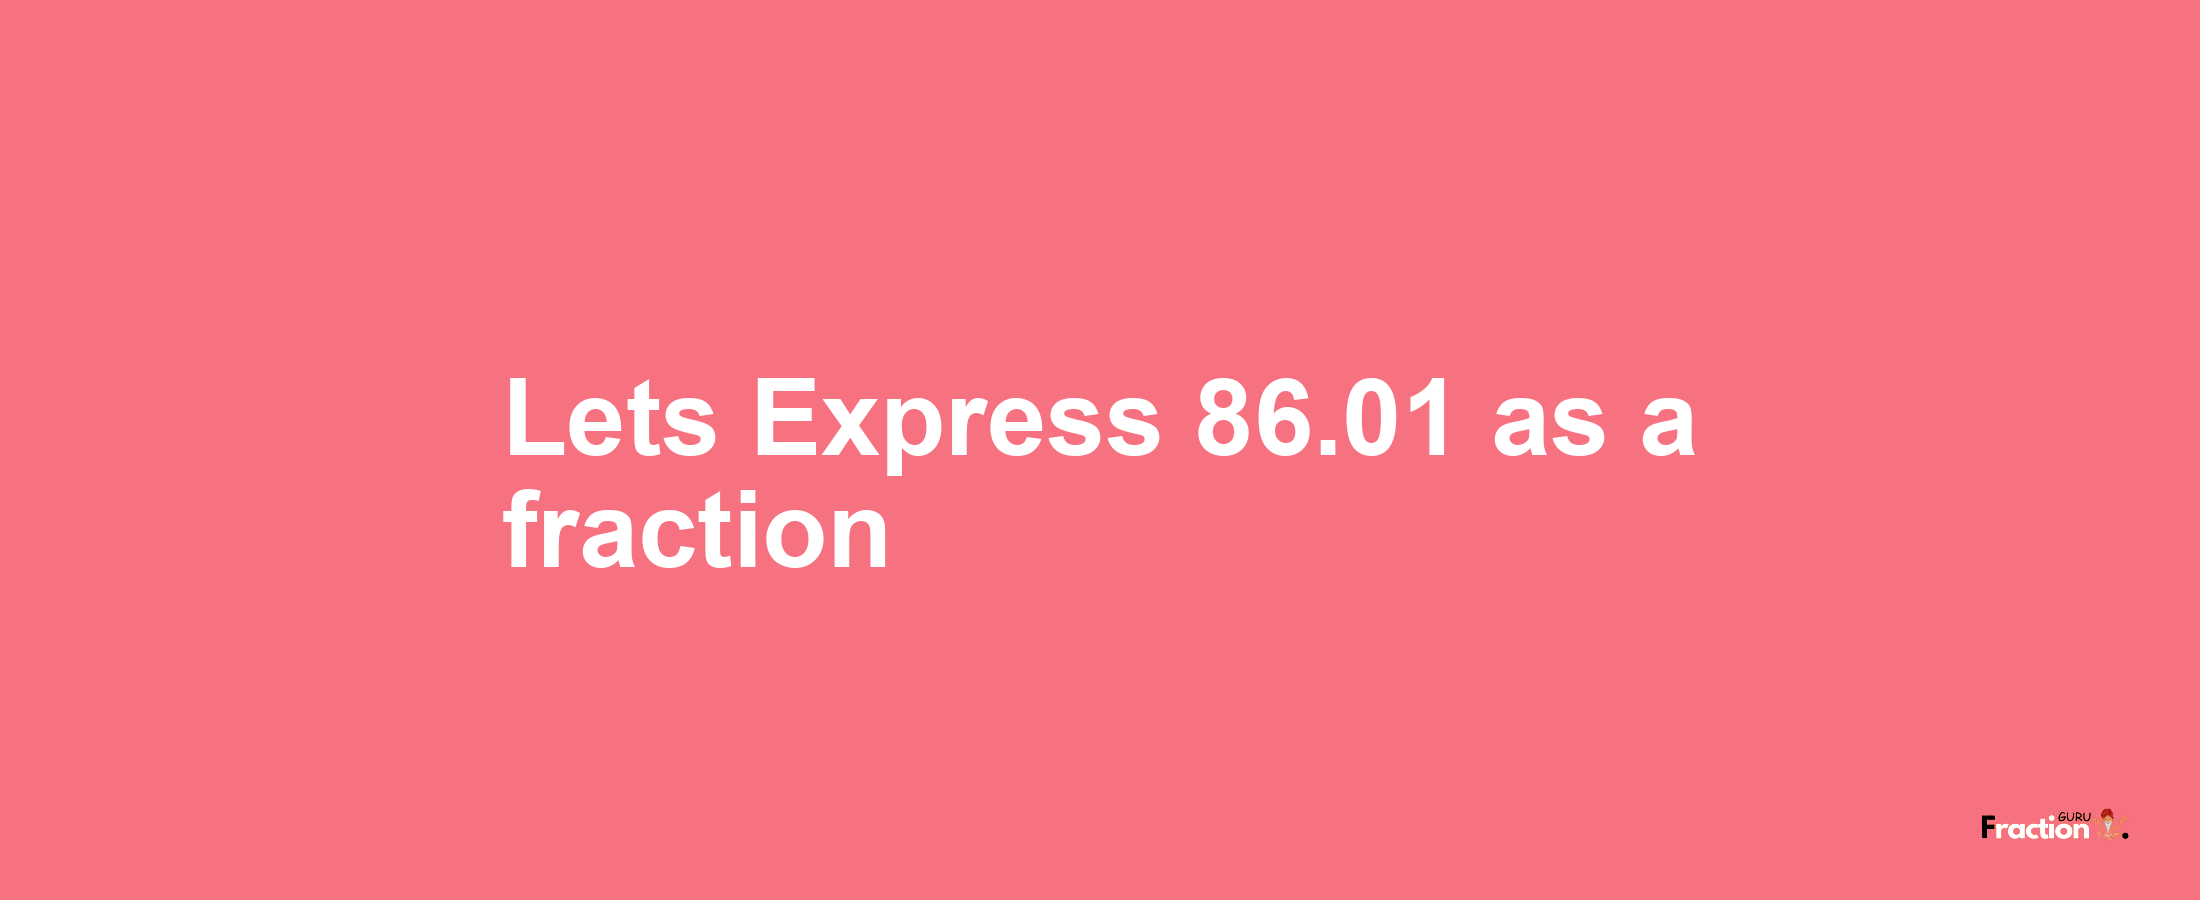 Lets Express 86.01 as afraction